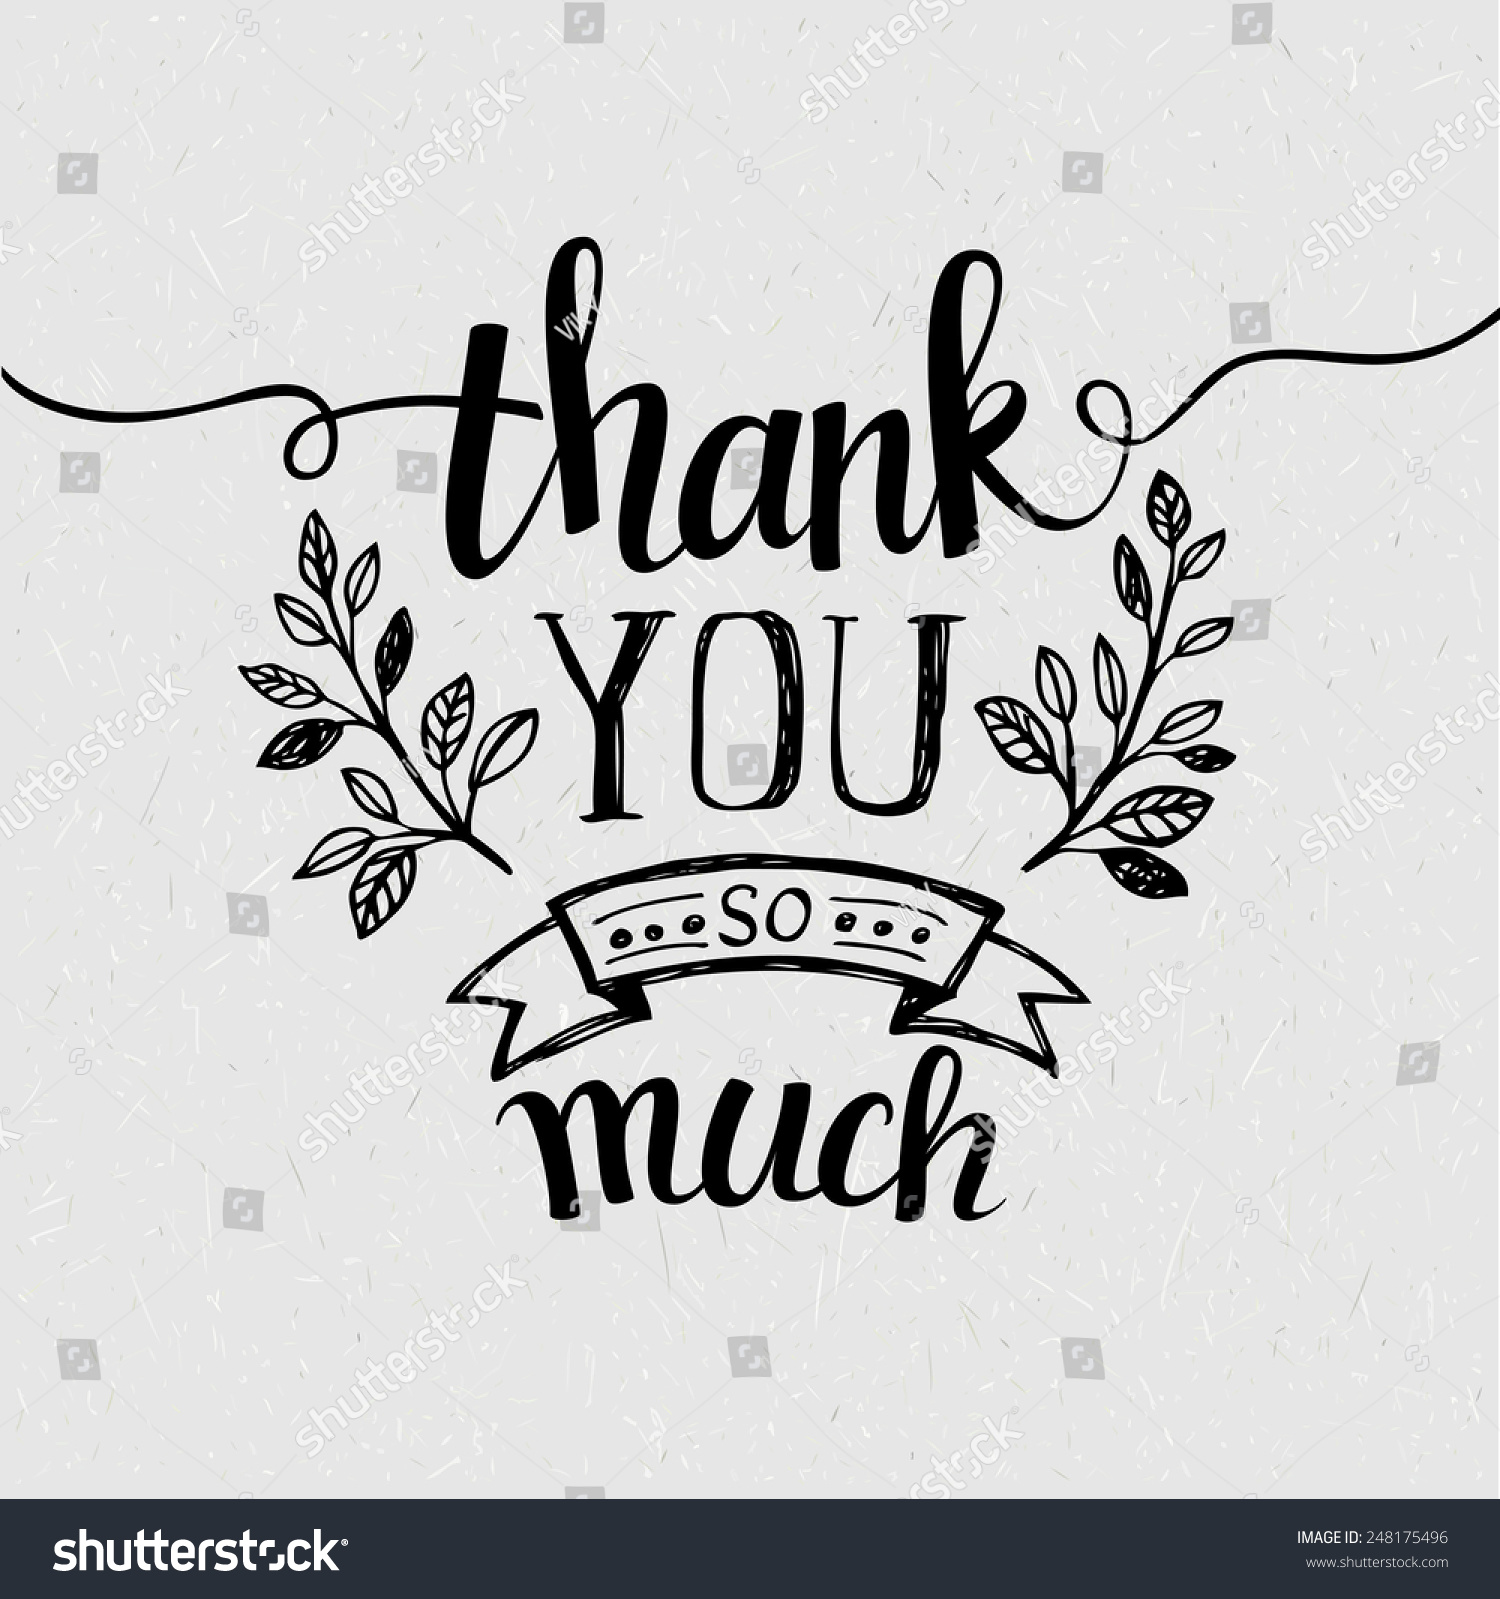 vector free download thank you - photo #31